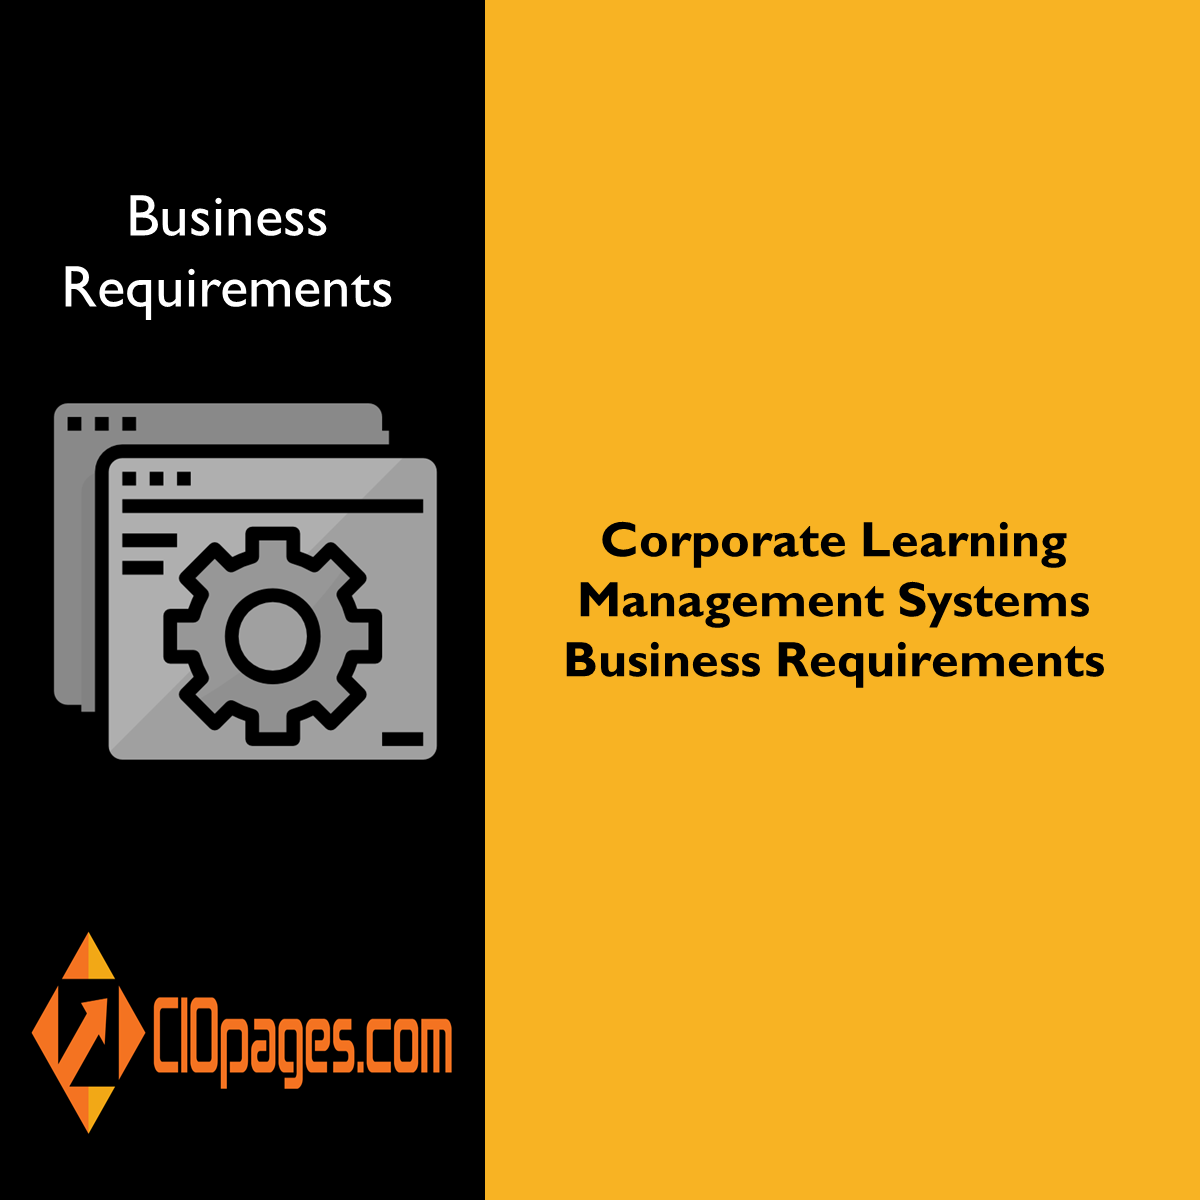 Corporate Learning Management Systems Business Requirements